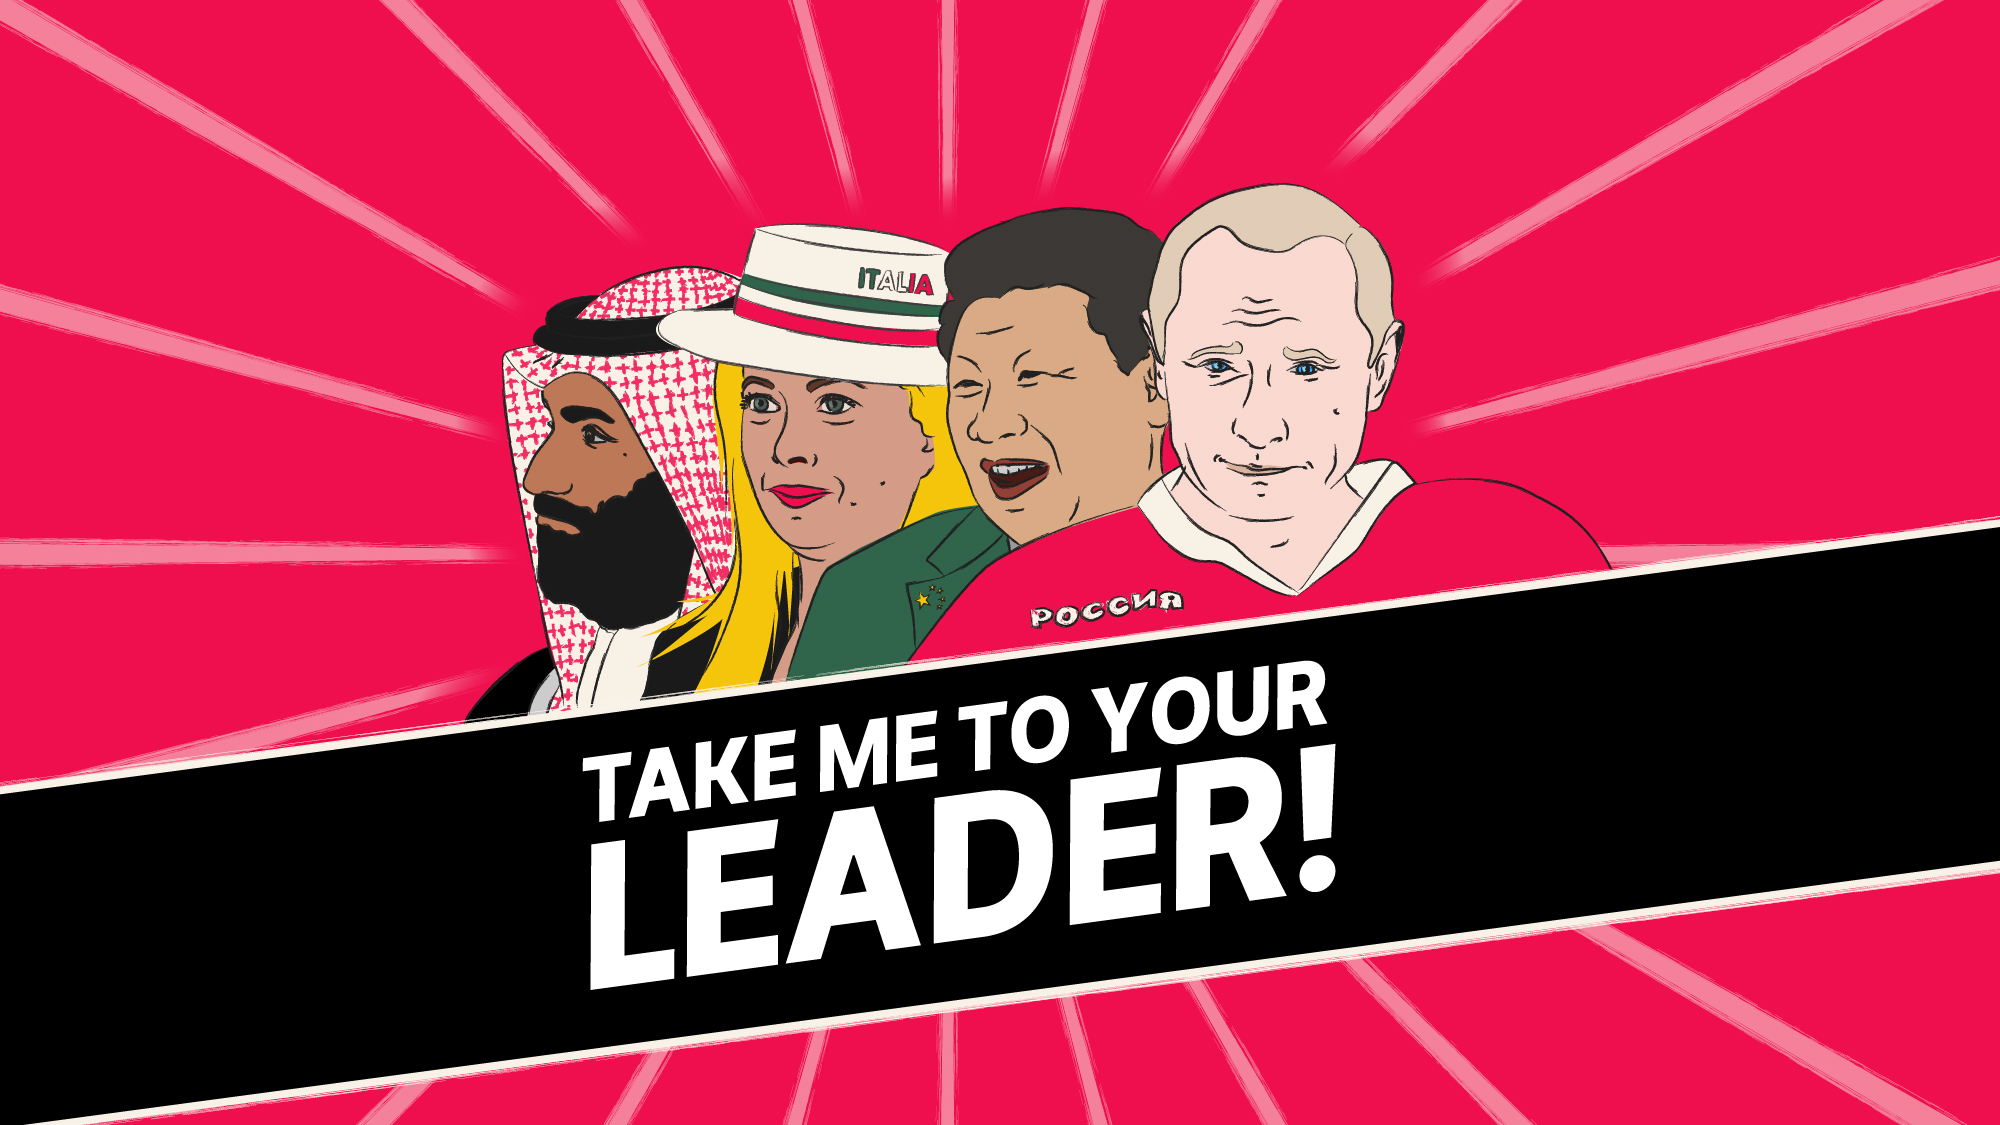 INTRODUCING — Take Me To Your Leader!